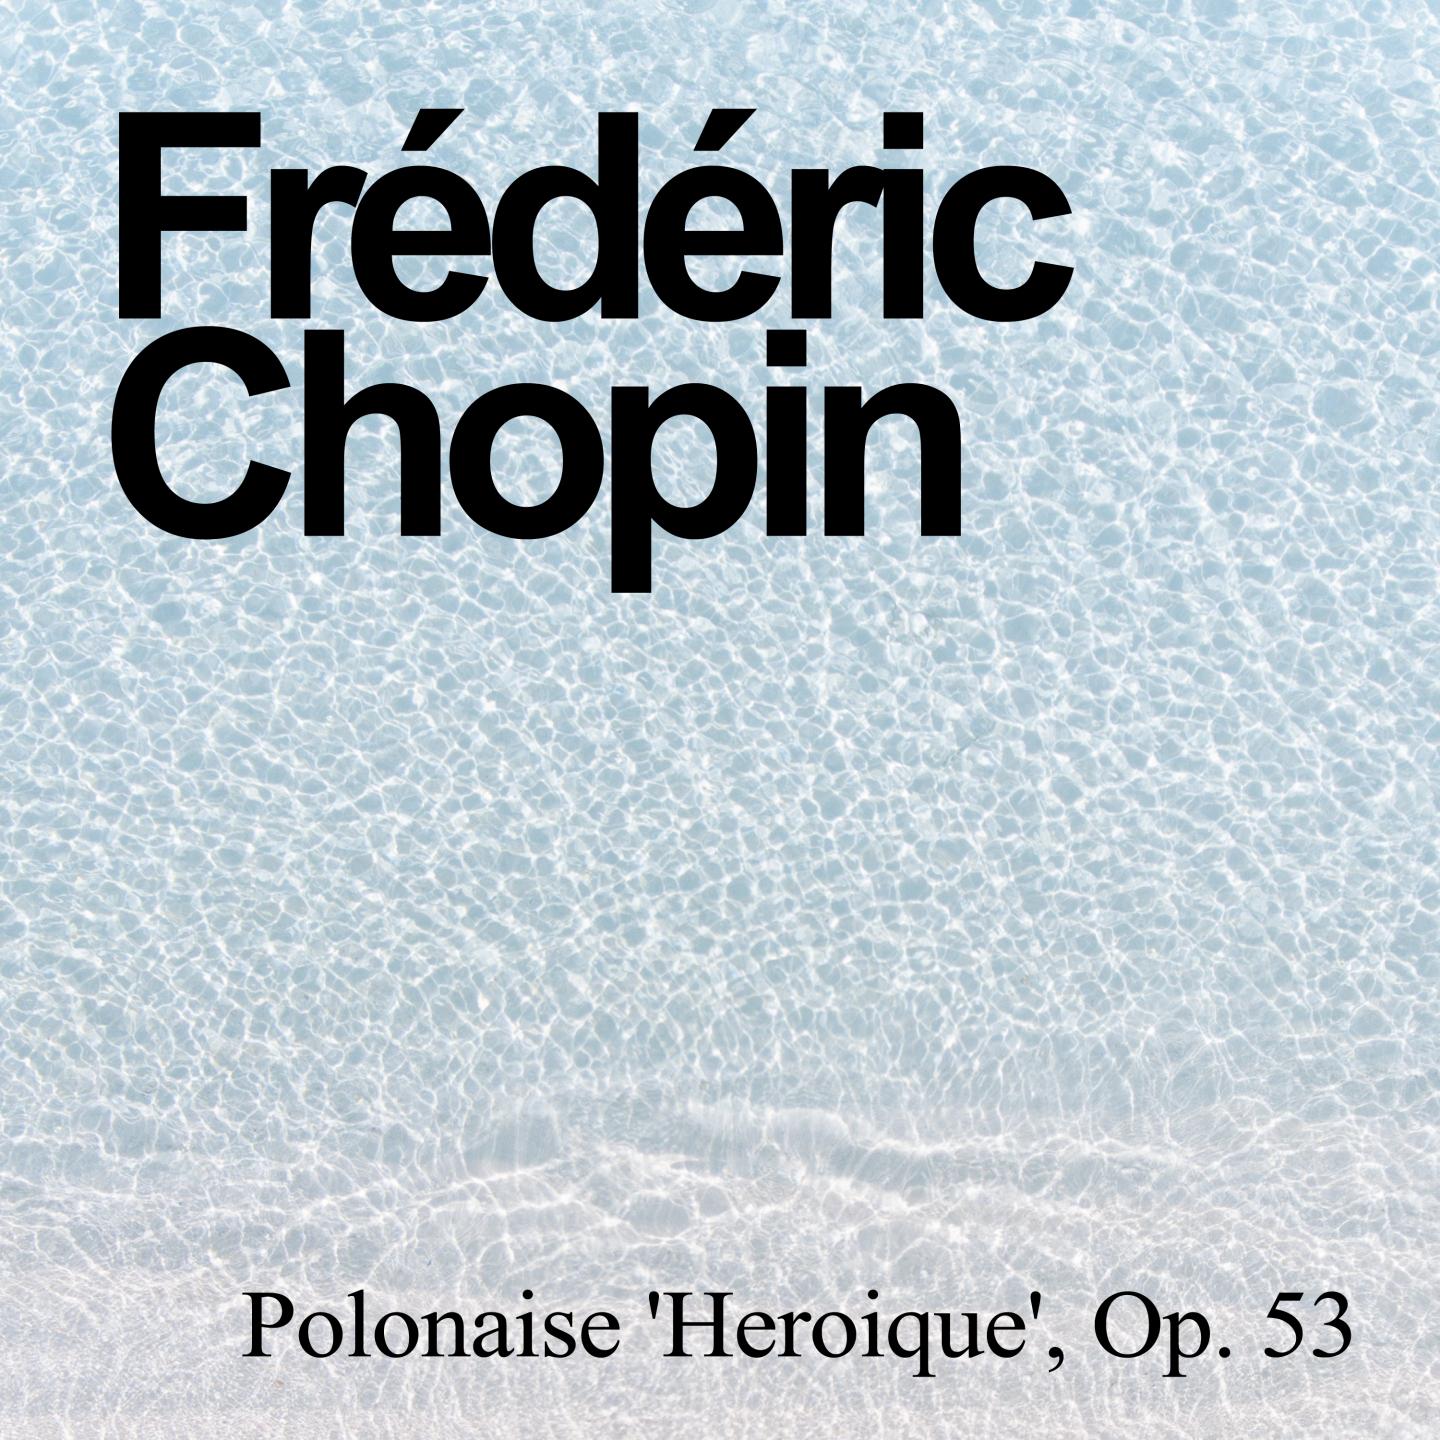 Polonaise 'Heroique', Op. 53 in A-Flat Major